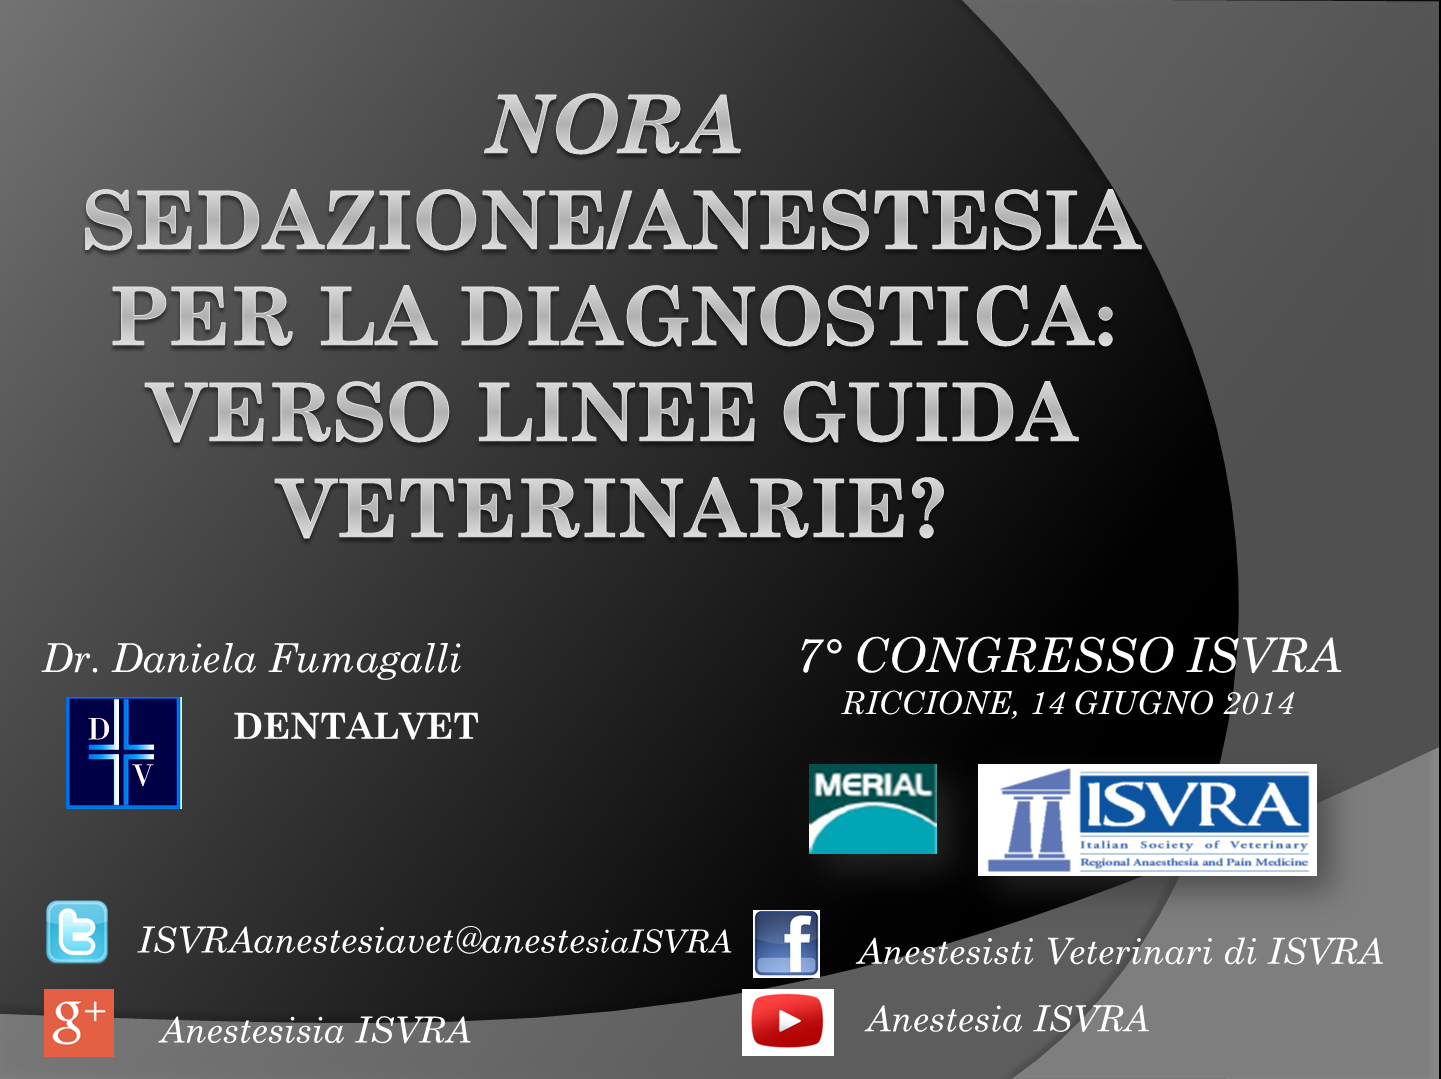 NORA in veterinary medicine: time for guidelines?